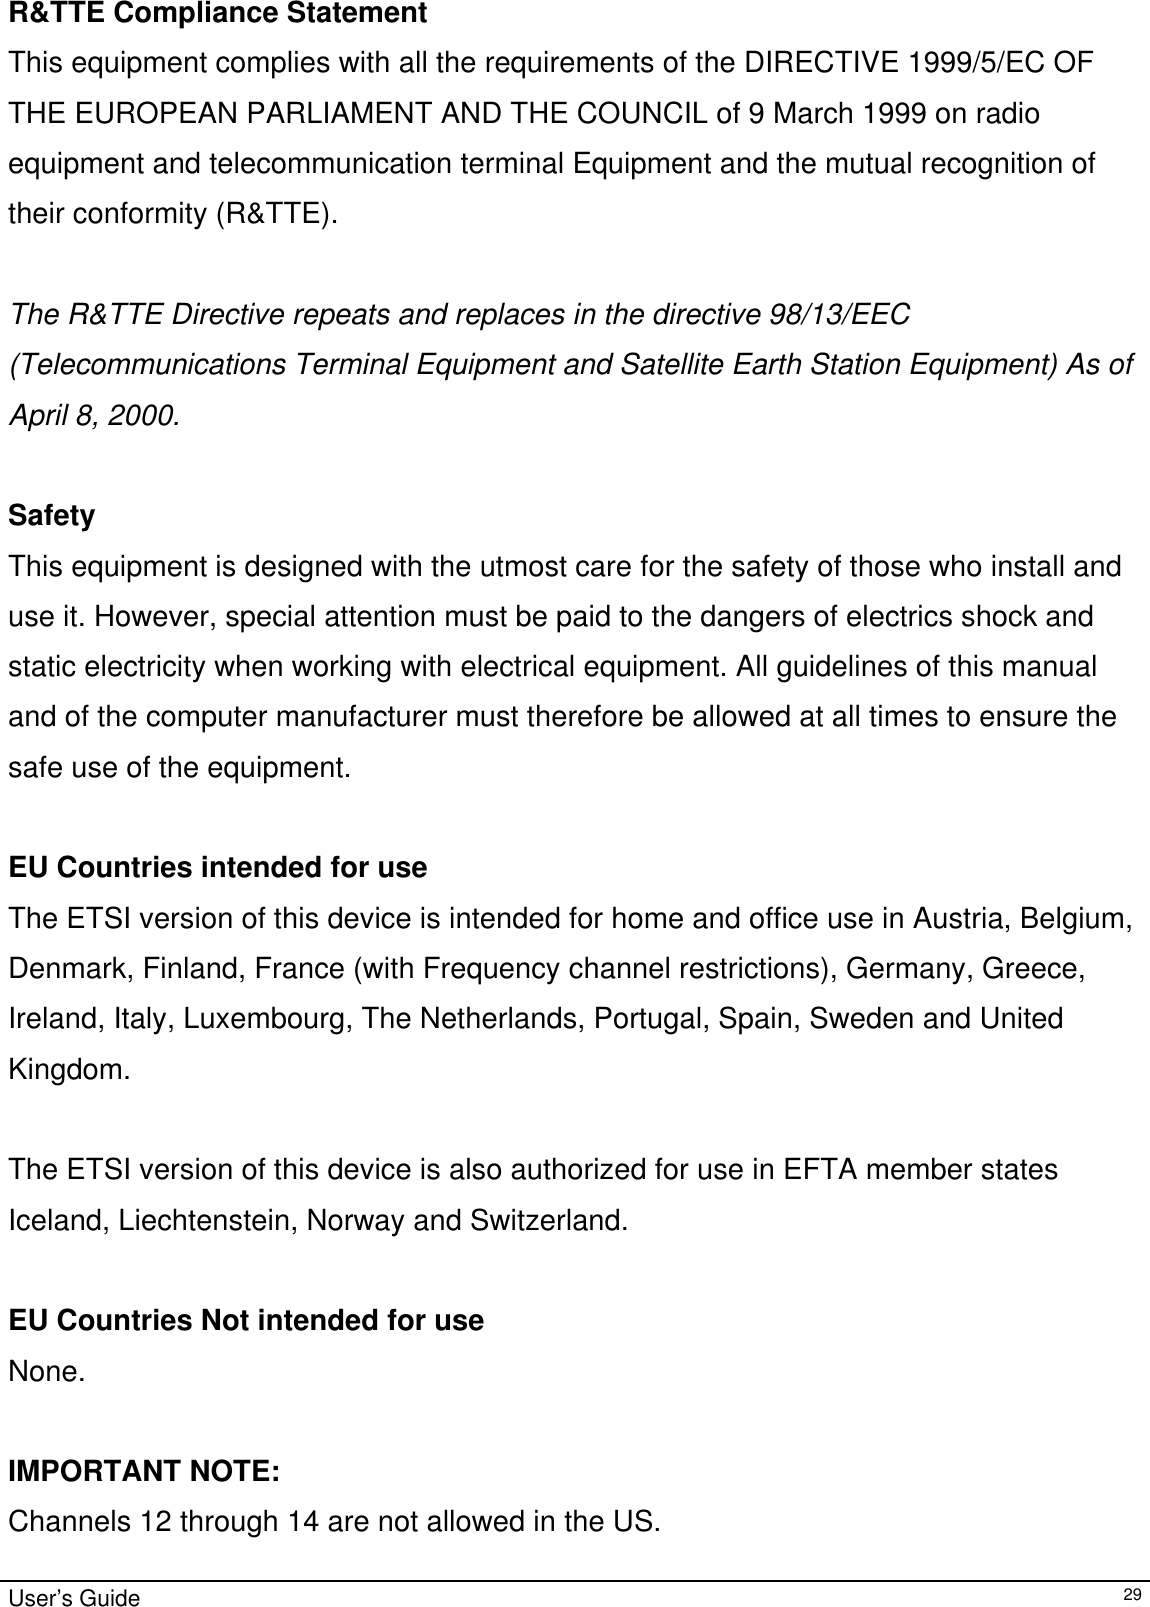                                                                                                                                                                                                                                         R&amp;TTE Compliance Statement This equipment complies with all the requirements of the DIRECTIVE 1999/5/EC OF THE EUROPEAN PARLIAMENT AND THE COUNCIL of 9 March 1999 on radio equipment and telecommunication terminal Equipment and the mutual recognition of their conformity (R&amp;TTE).  The R&amp;TTE Directive repeats and replaces in the directive 98/13/EEC (Telecommunications Terminal Equipment and Satellite Earth Station Equipment) As of April 8, 2000.  Safety This equipment is designed with the utmost care for the safety of those who install and use it. However, special attention must be paid to the dangers of electrics shock and static electricity when working with electrical equipment. All guidelines of this manual and of the computer manufacturer must therefore be allowed at all times to ensure the safe use of the equipment.  EU Countries intended for use The ETSI version of this device is intended for home and office use in Austria, Belgium, Denmark, Finland, France (with Frequency channel restrictions), Germany, Greece, Ireland, Italy, Luxembourg, The Netherlands, Portugal, Spain, Sweden and United Kingdom.  The ETSI version of this device is also authorized for use in EFTA member states Iceland, Liechtenstein, Norway and Switzerland.  EU Countries Not intended for use None.  IMPORTANT NOTE: Channels 12 through 14 are not allowed in the US. User’s Guide   29